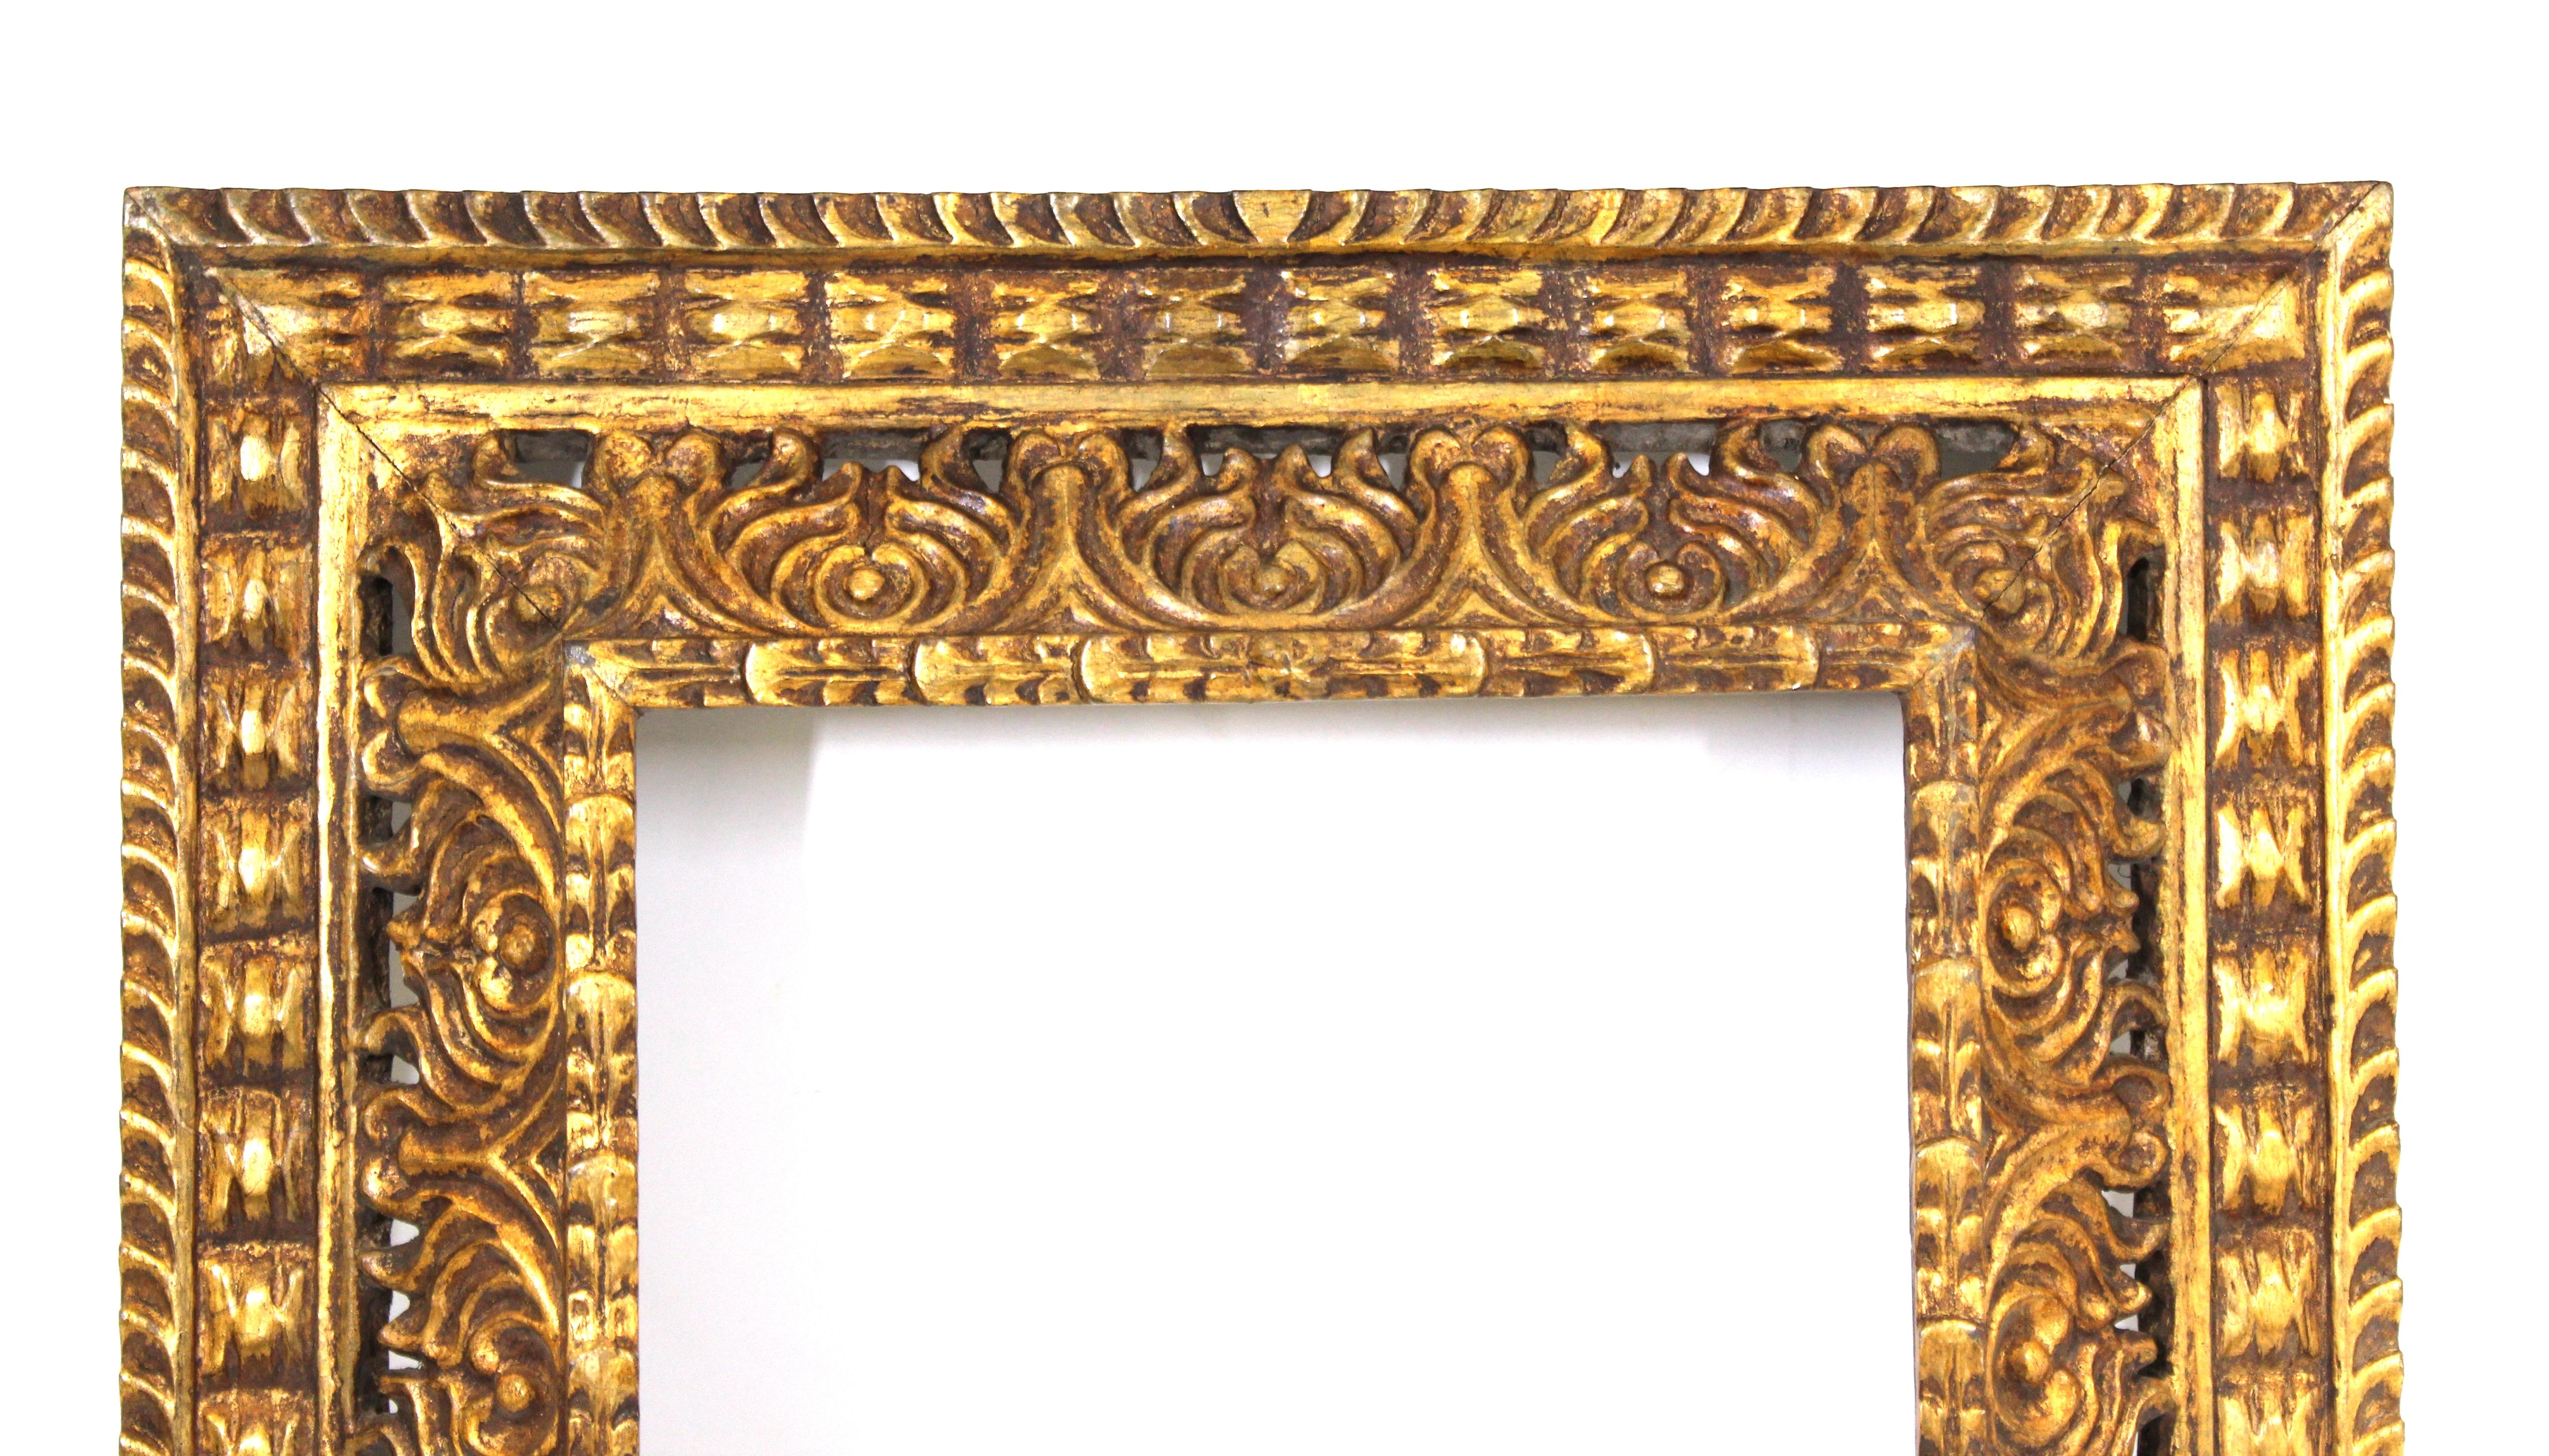 Spanish Baroque Revival period picture frame in ornate carved giltwood. The piece was made in Spain in the 19th century and is in great antique condition with age-appropriate wear and desirable patina.